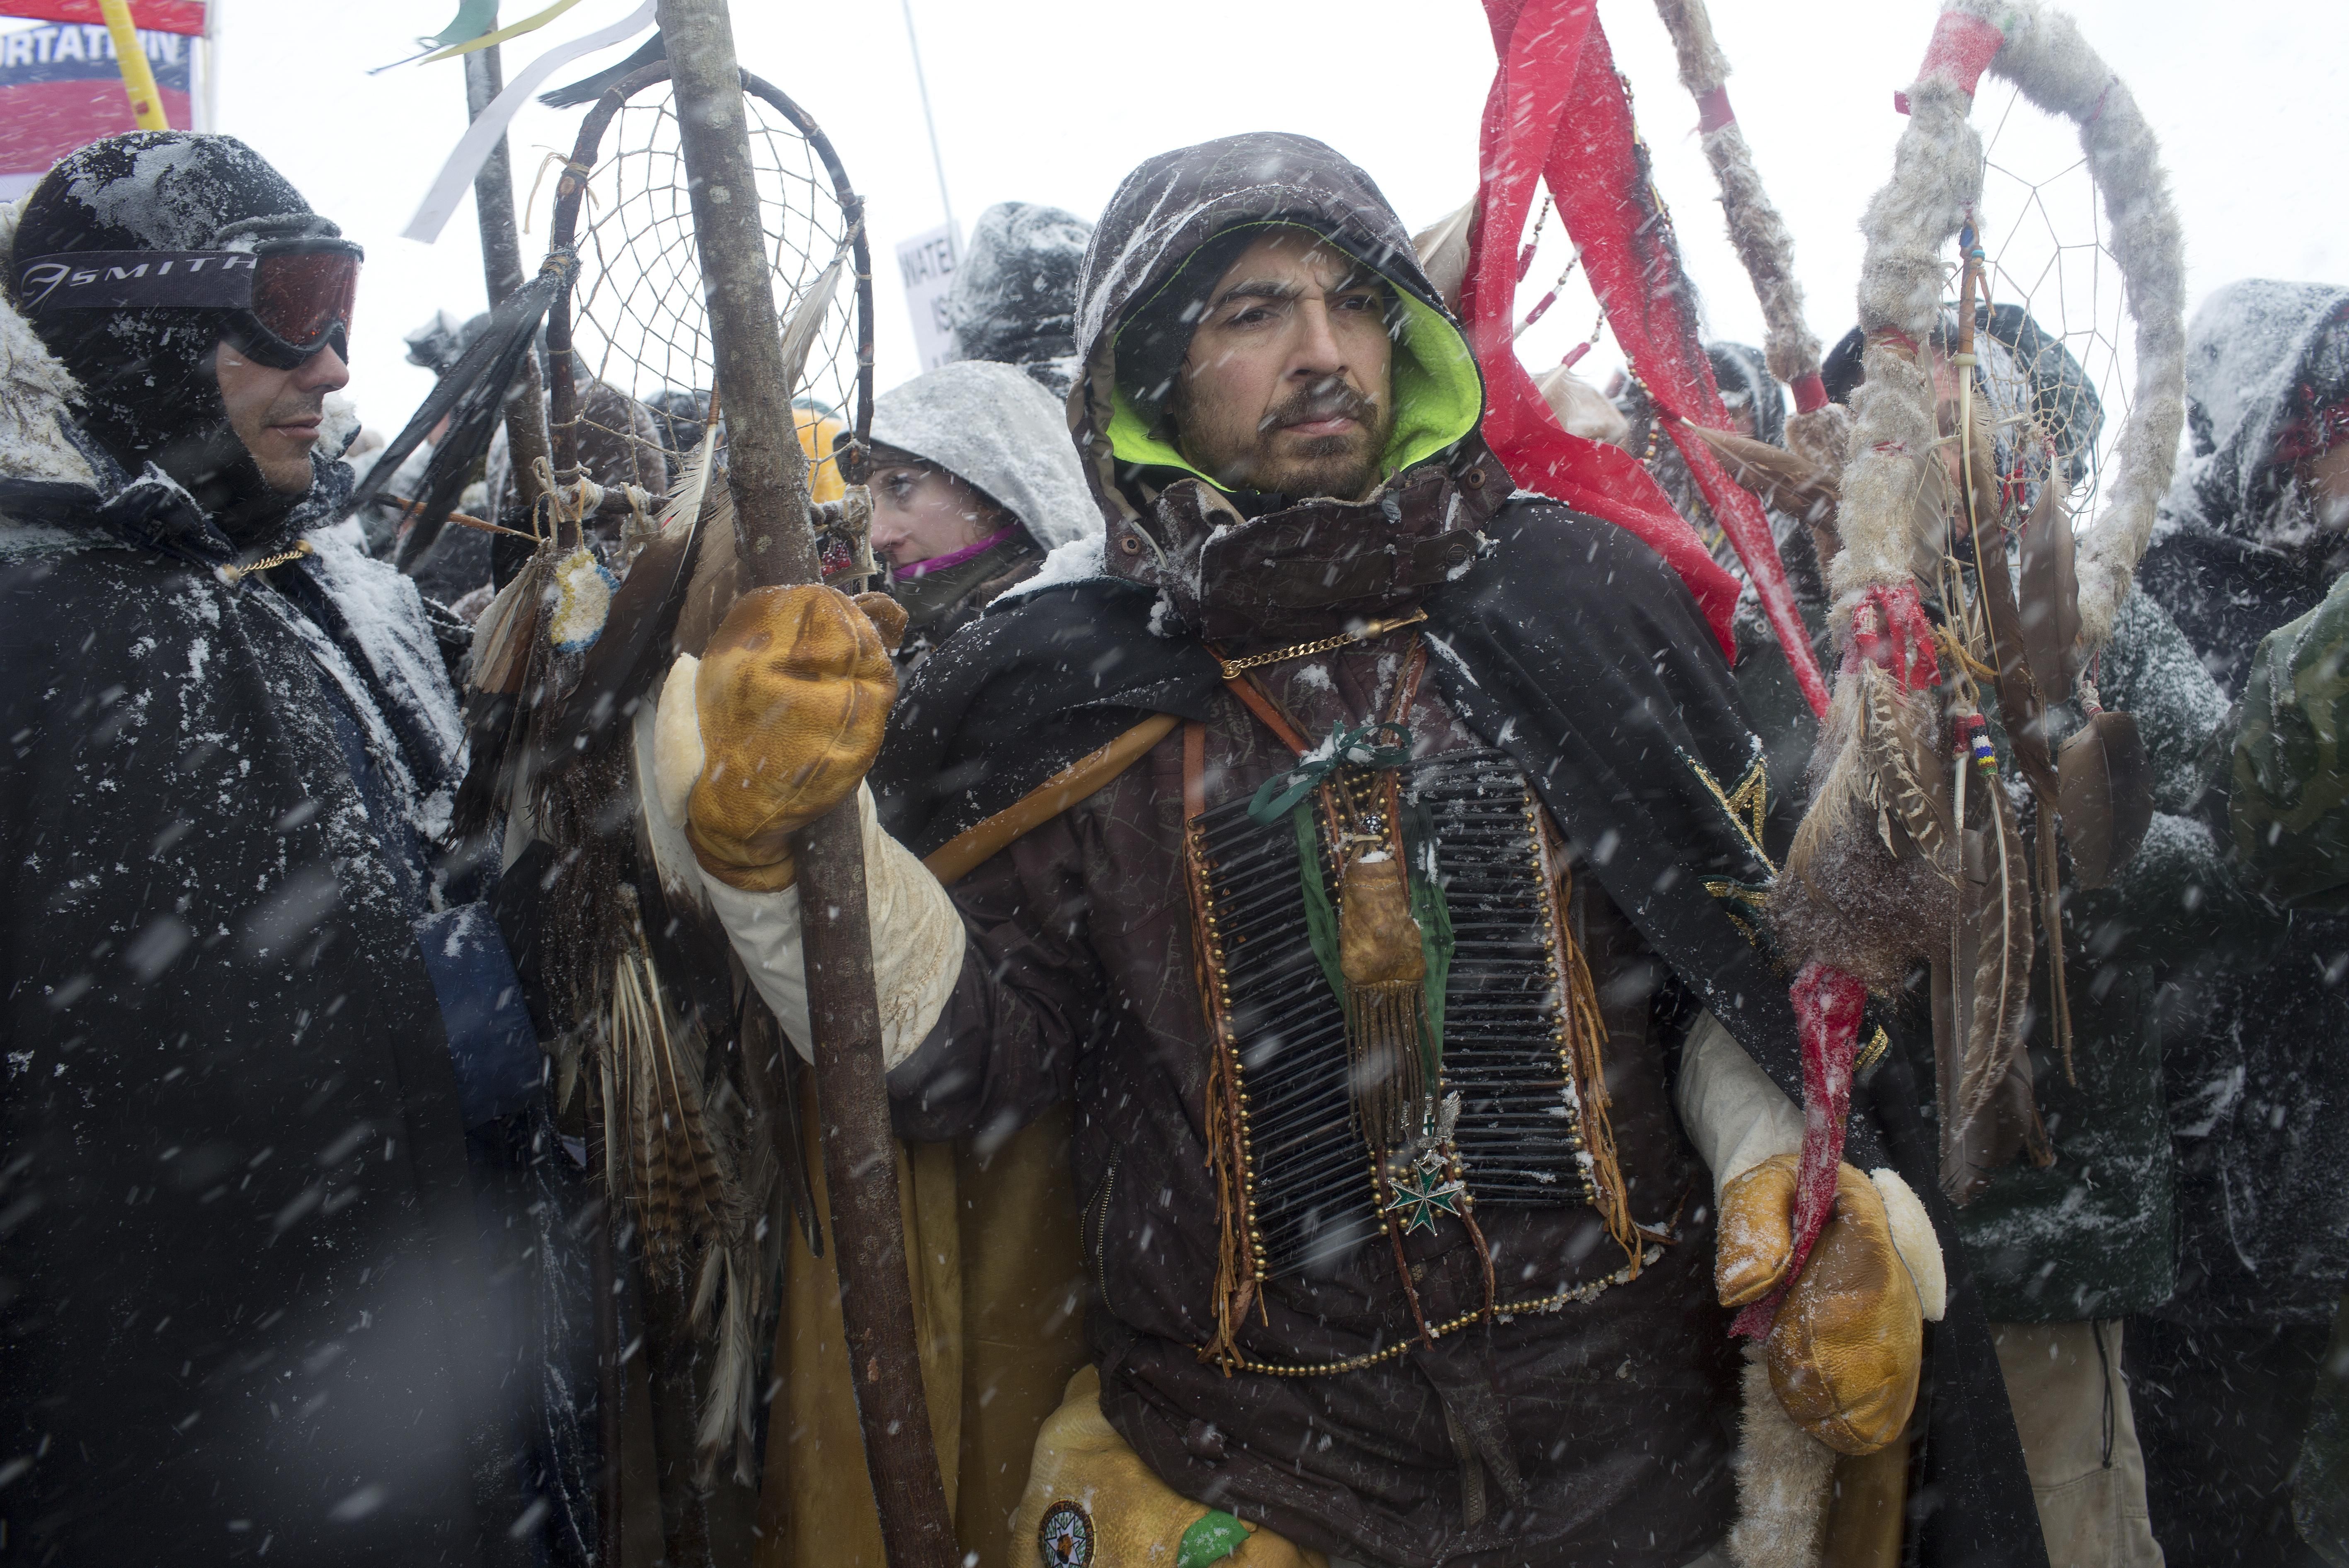 Over two hundred tribes, joined by environmental activists and hundreds of United States military veterans, camp and demonstrate against the Dakota Access Pipeline, just outside of the Lakota Sioux reservation of Standing Rock, North Dakota, on December 5, 2016